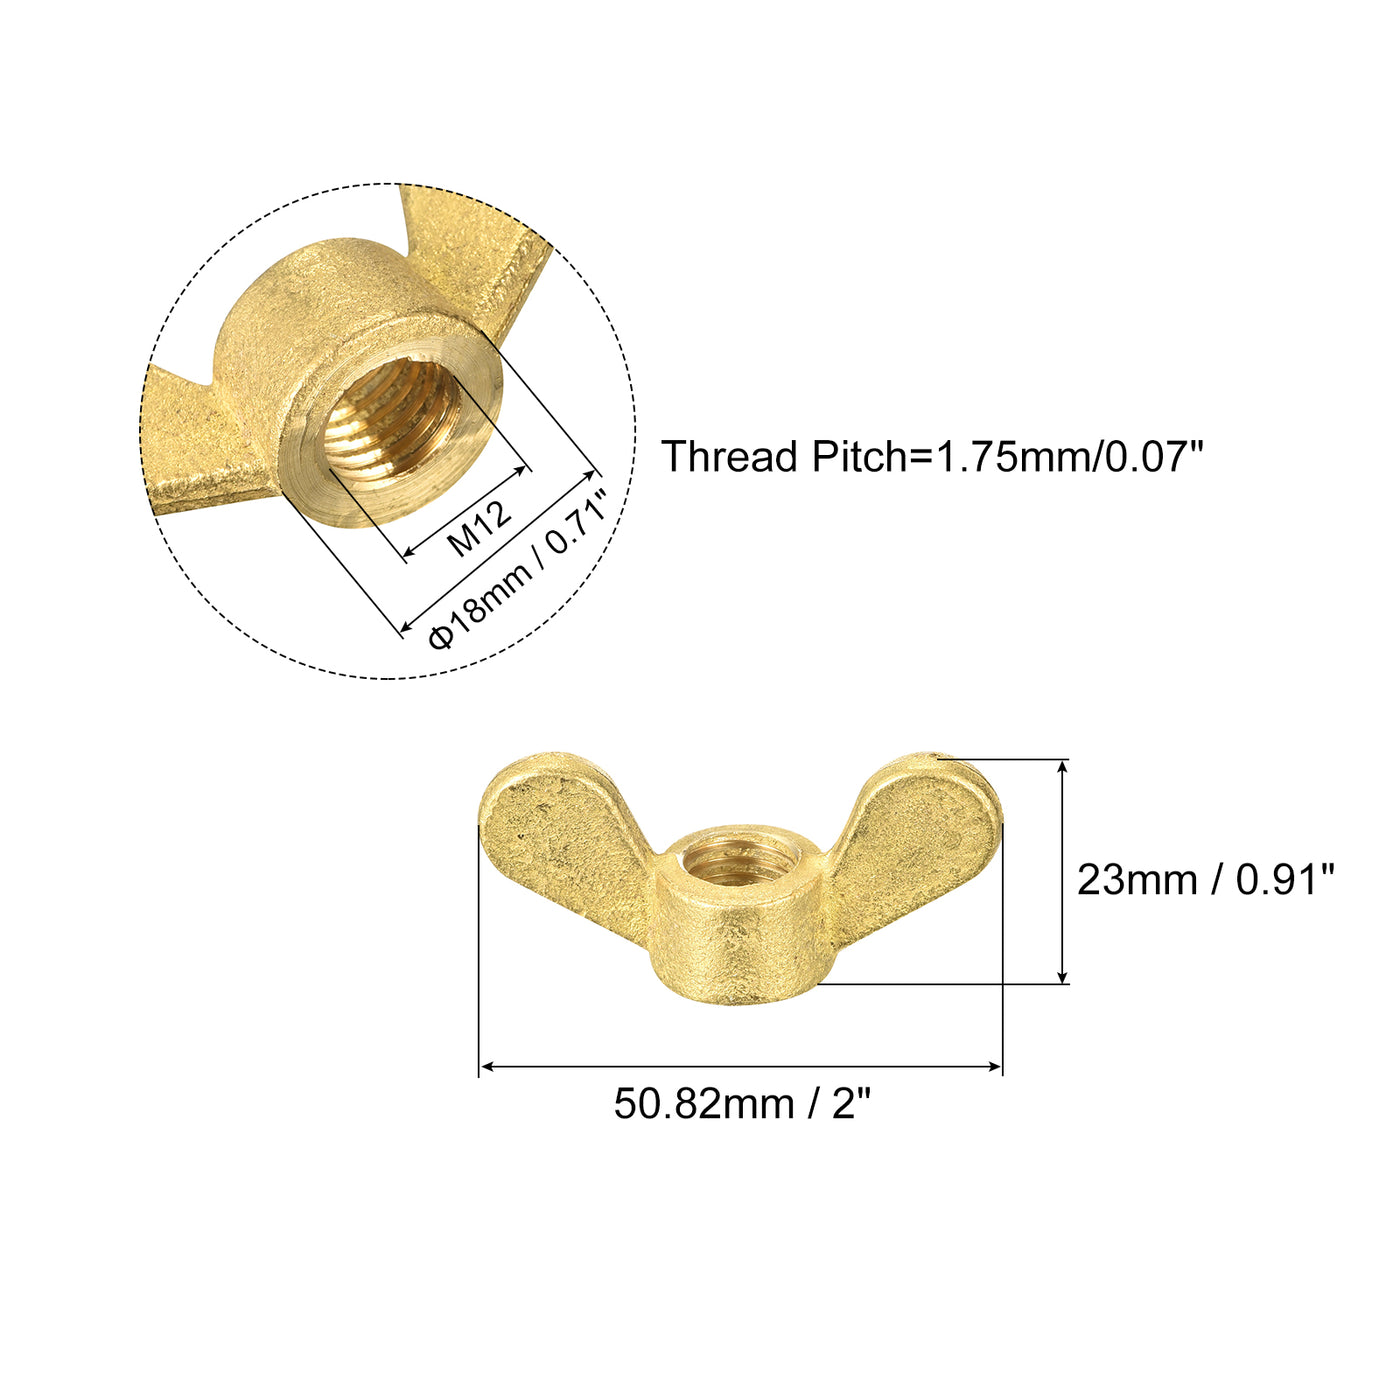 uxcell Uxcell Brass Wing Nuts, M12 Butterfly Nut Hand Twist Tighten Fasteners for Furniture, Machinery, Electronic Equipment, 3Pcs